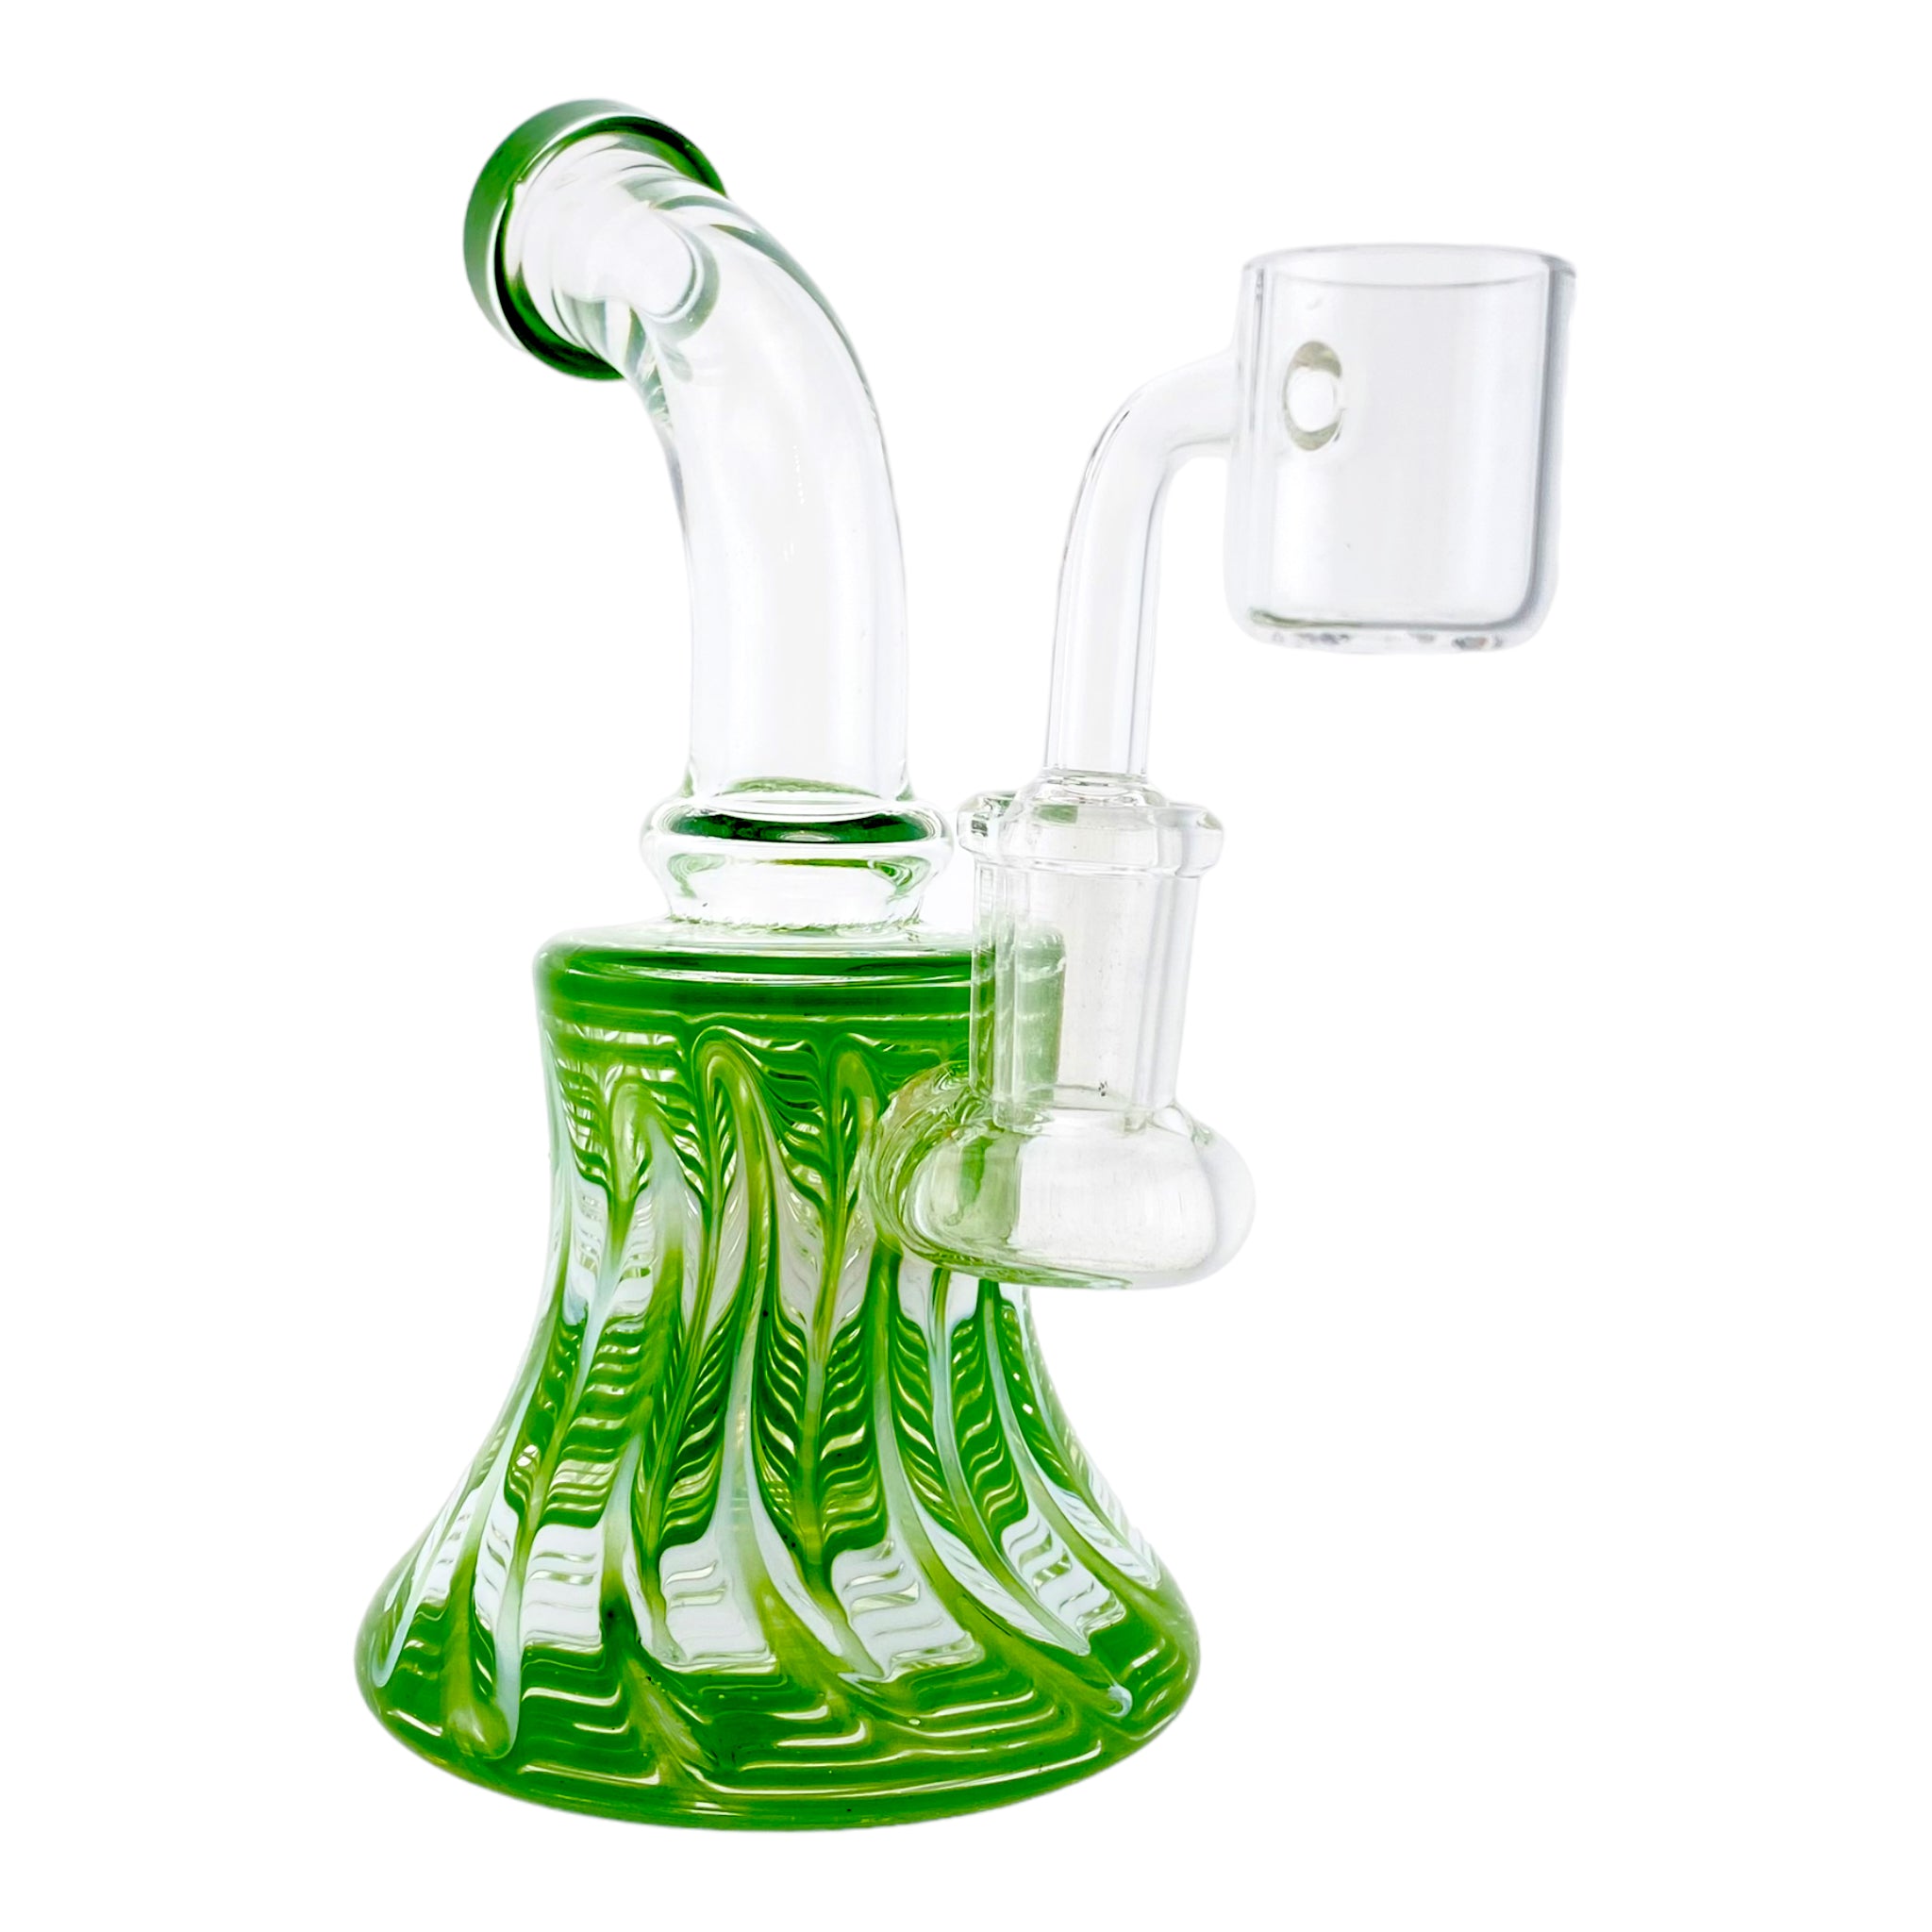 Small Dab Rig With Green Wrap And Rake